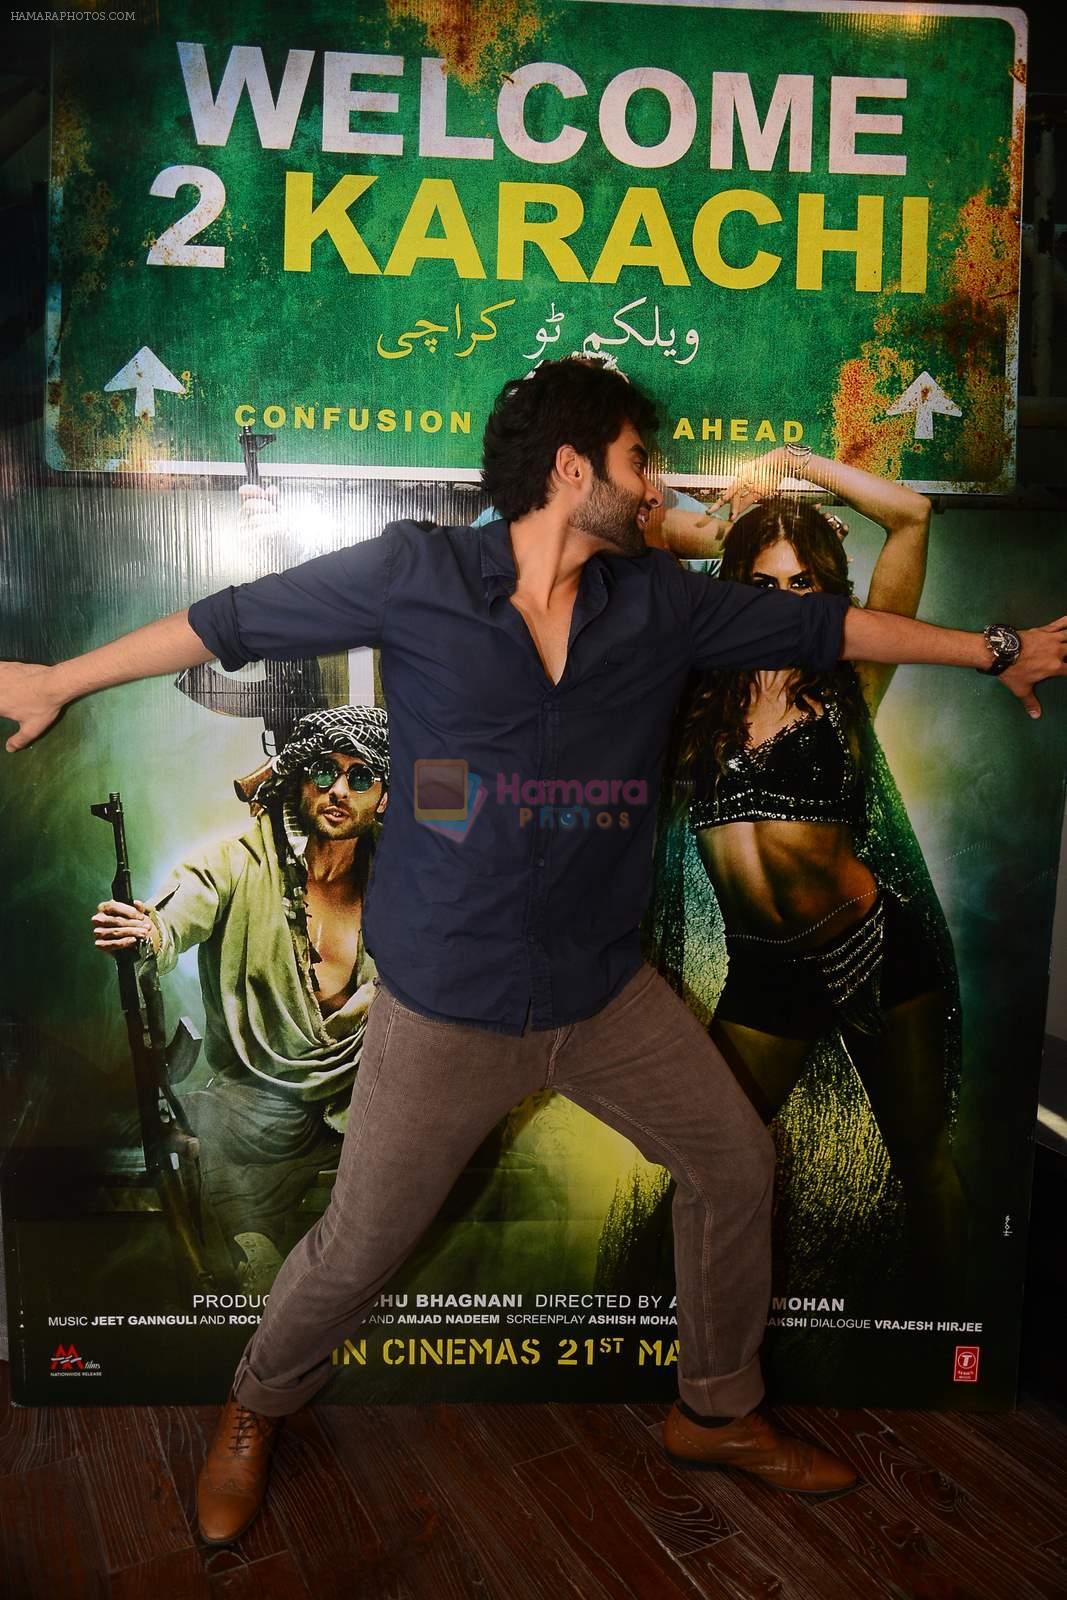 Jackky Bhagnani at Welcome to Karachi promotions in Honey Homes on 13th May 2015